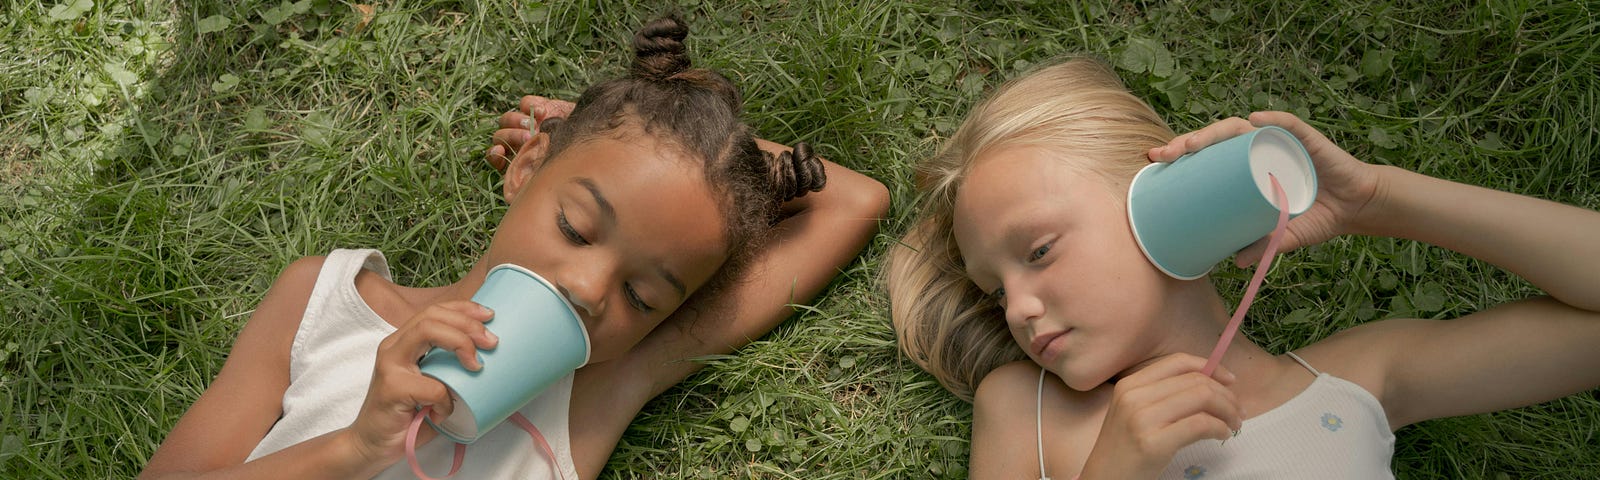 Two young girls laying on grass play telephone with cups and string.